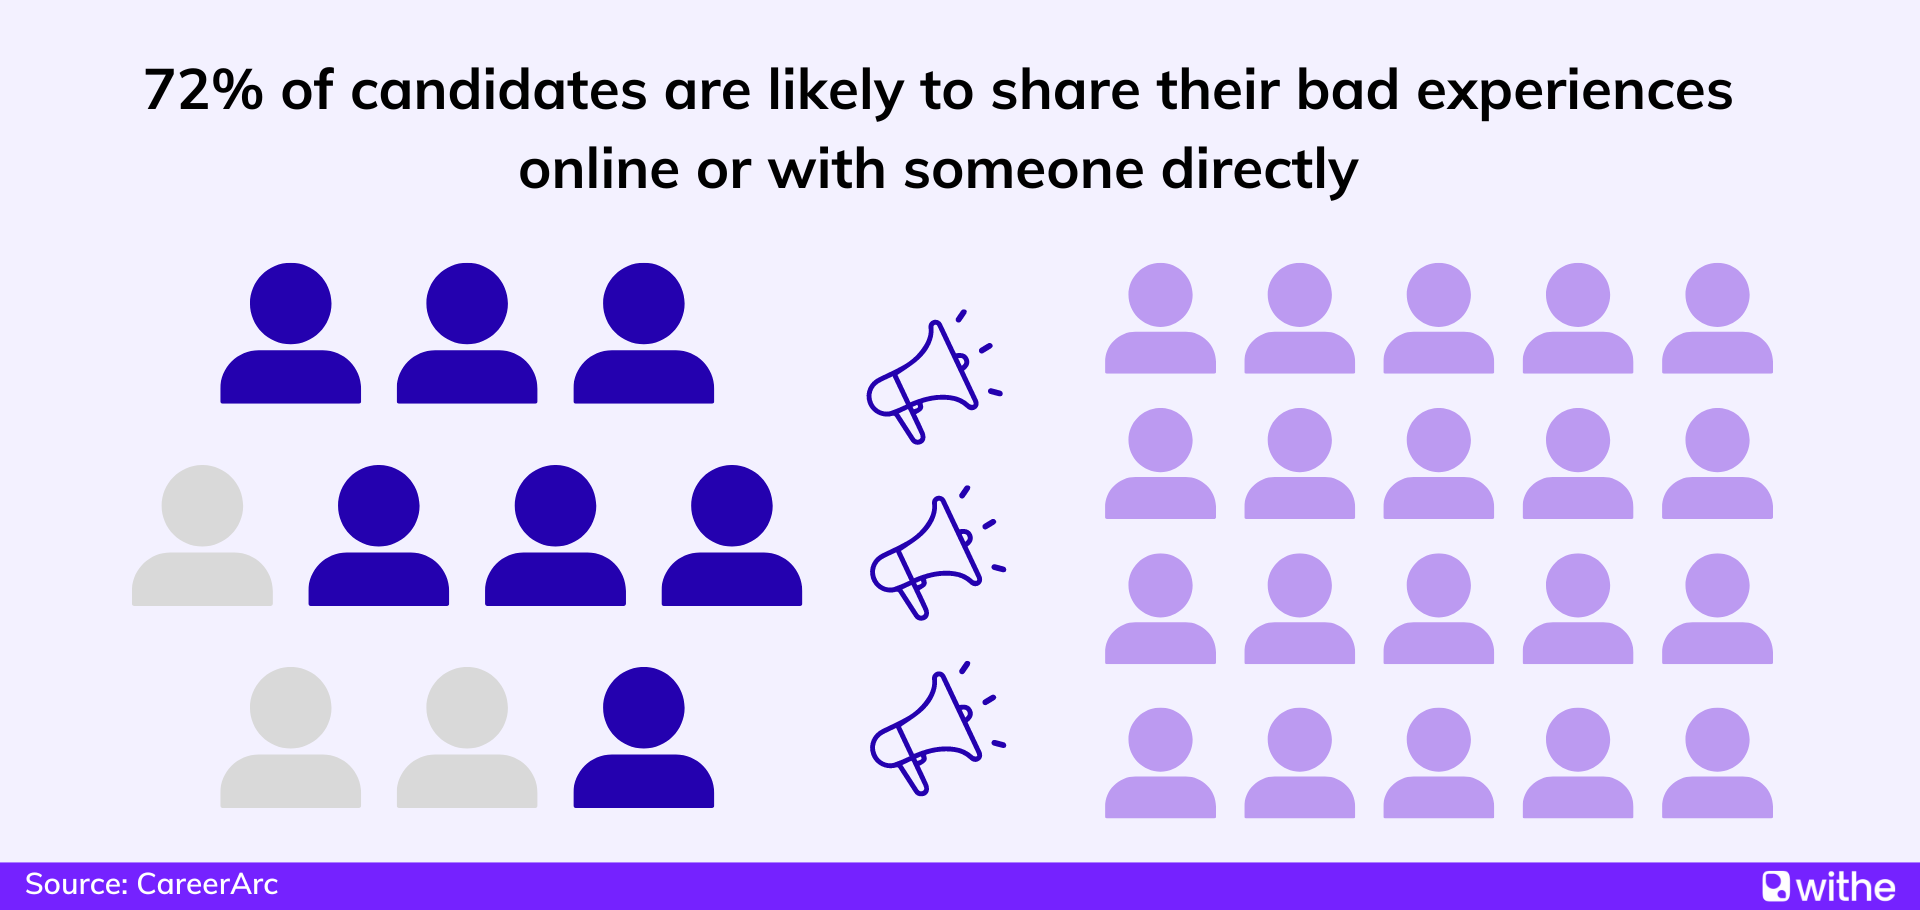 Candidate experience statistics - 72% of candidates are likely to share their bad experiences online or with someone directly